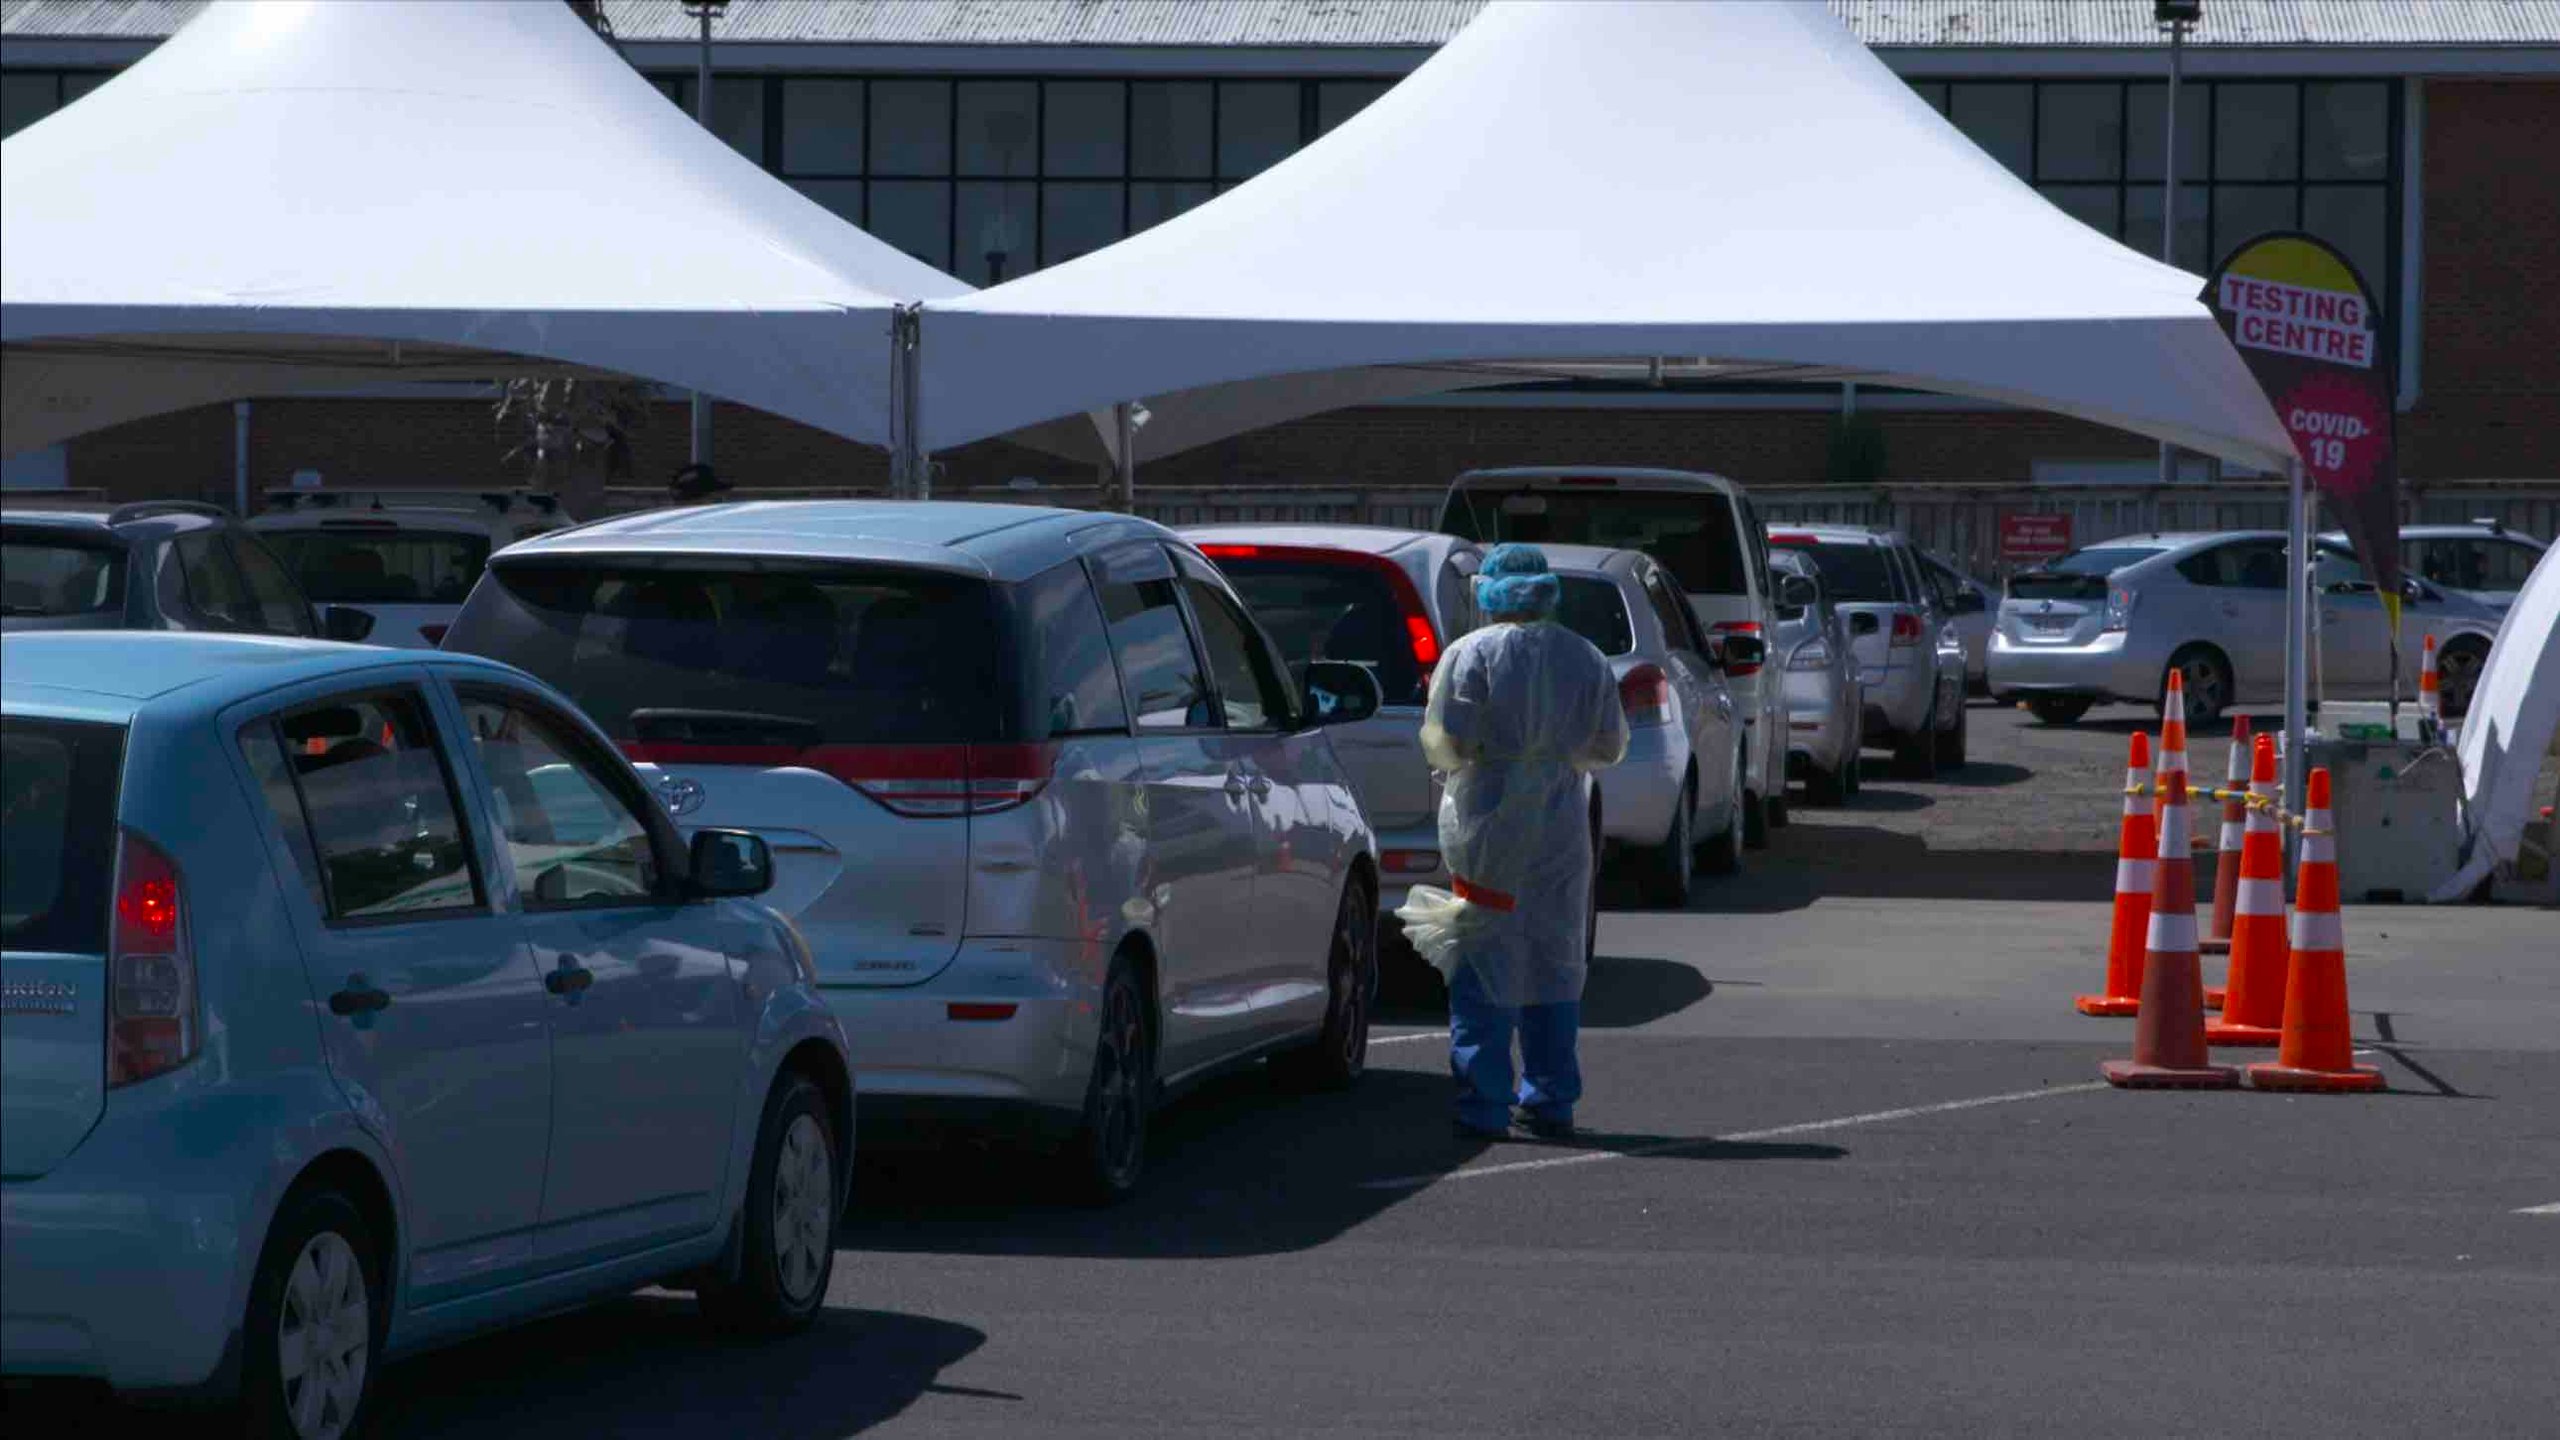 cars lined up at an auckland covid-19 testing station